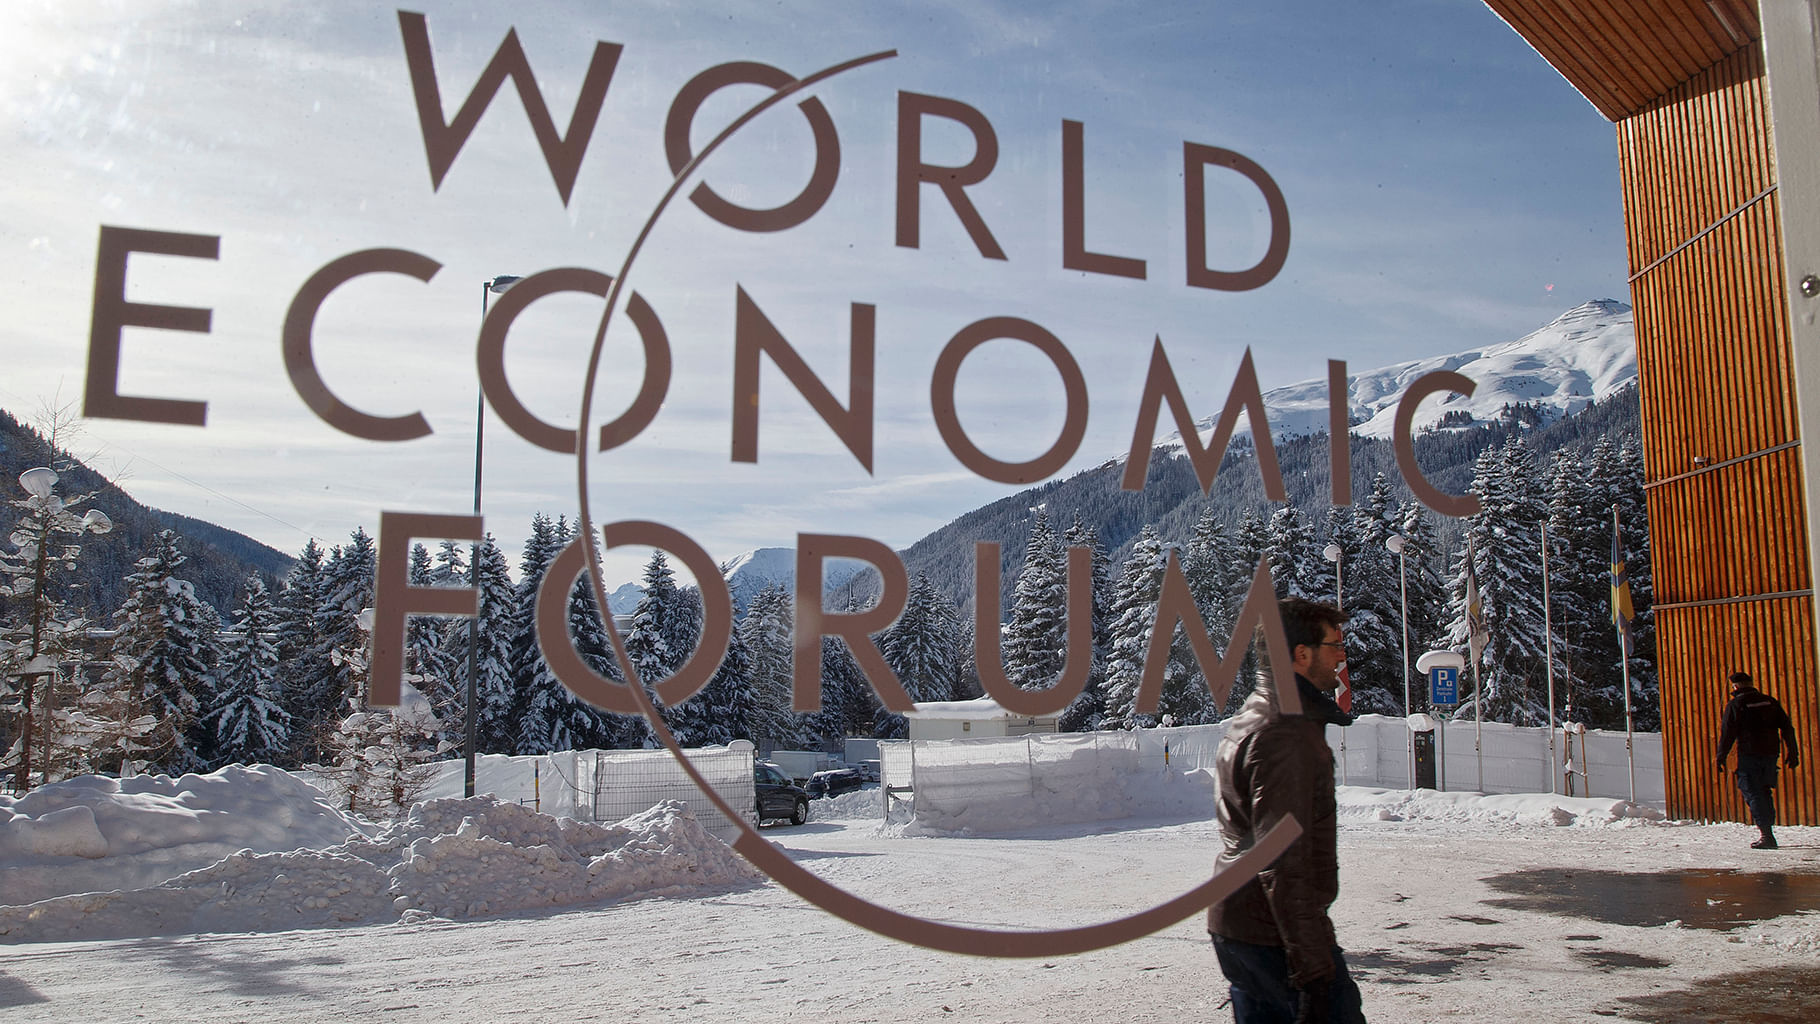 The theme of the 2016 World Economic Forum at Davos, Switzerland, which took place from 20 to 23 Jan, was ‘Mastering the Fourth Industrial Revolution (Photo: AP)